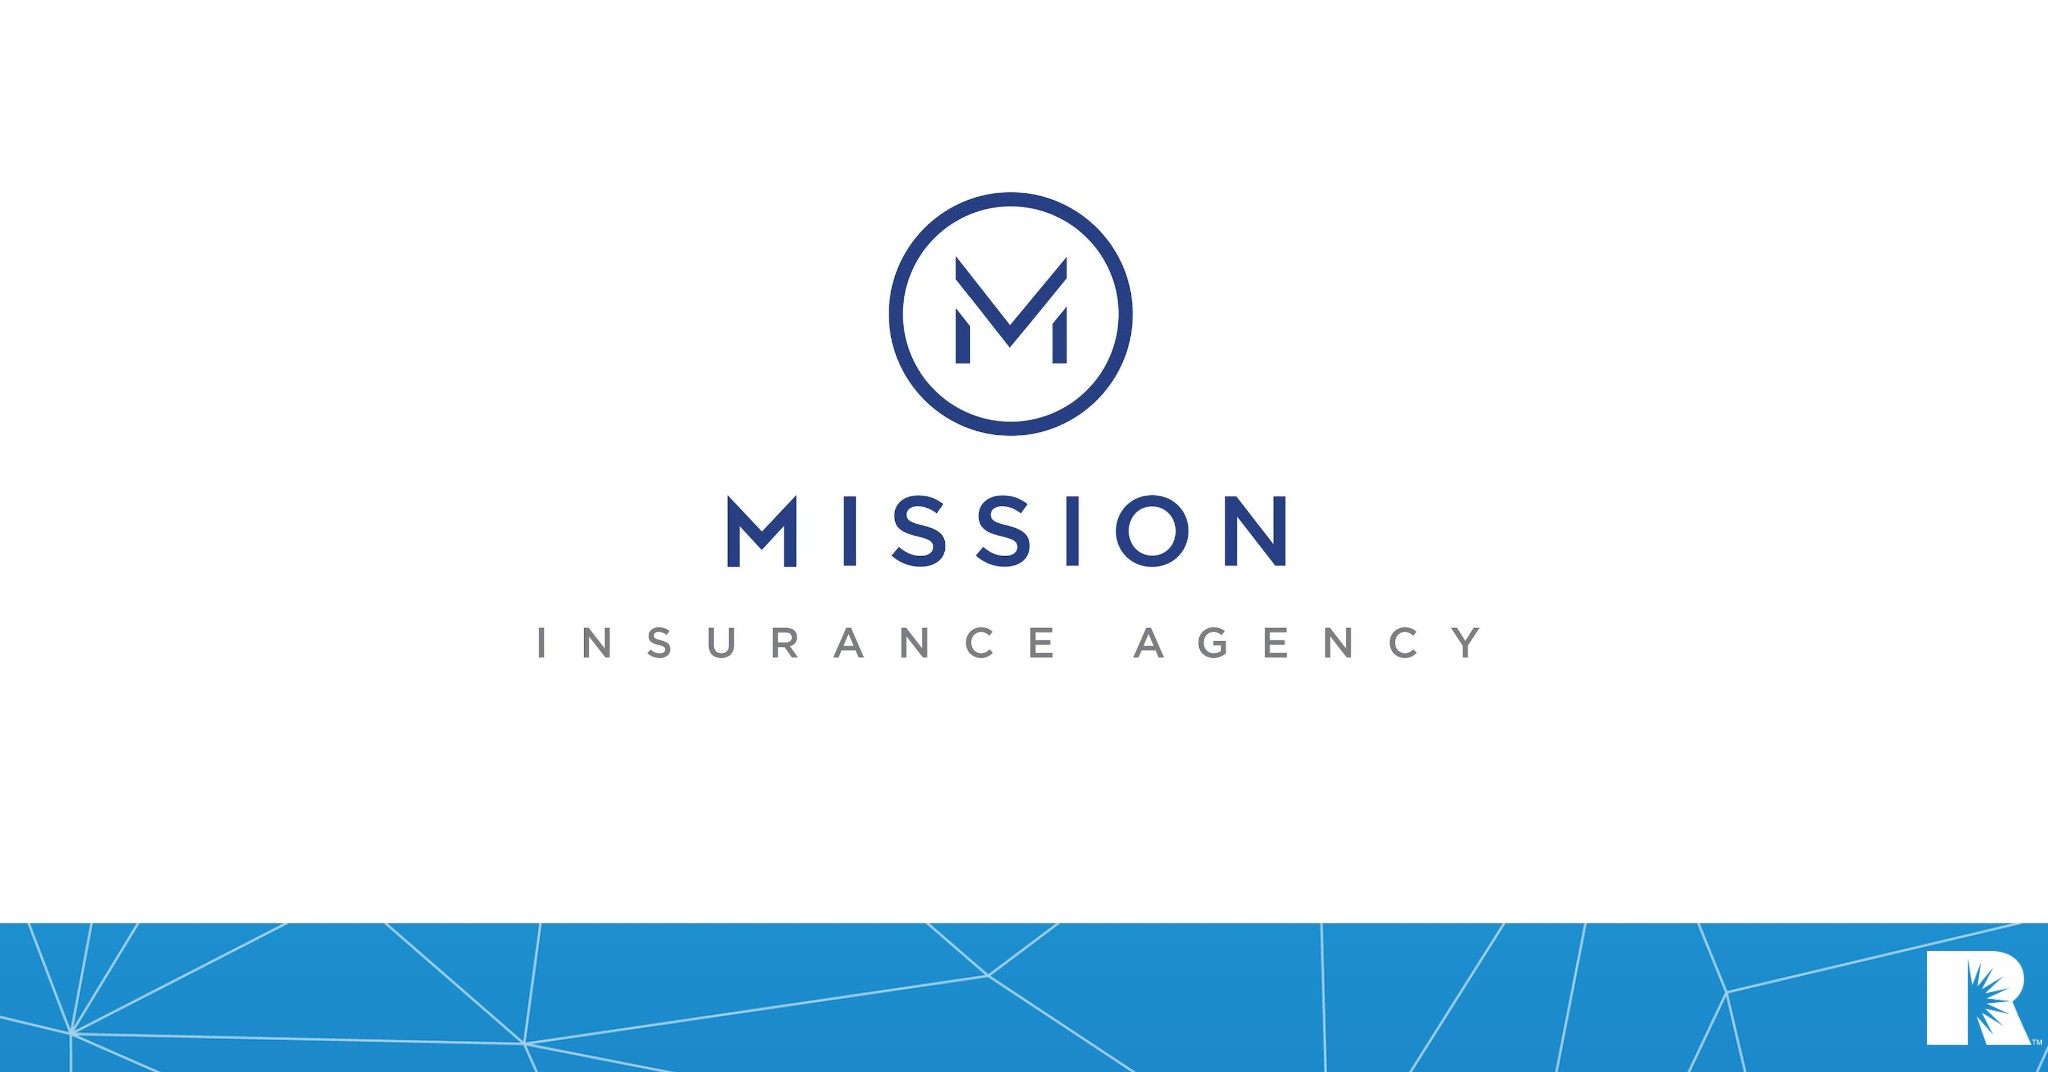 Business logo for Mission Insurance Agency.